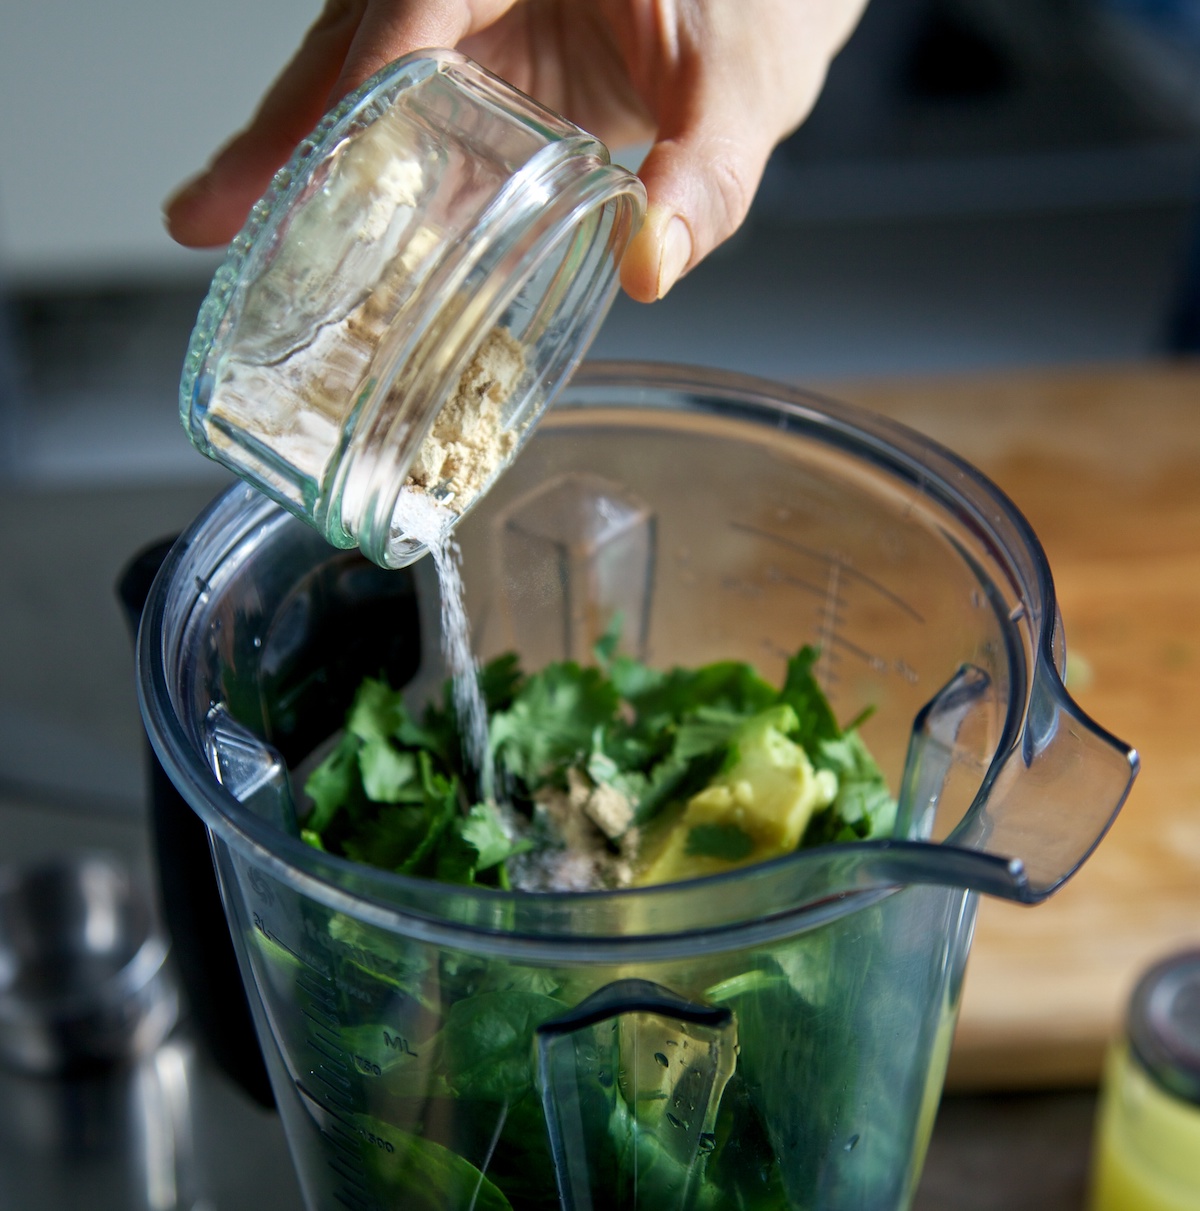 Adding spices to the Vitamix jug with the raw avocado, spinach and lime soup ingredients in